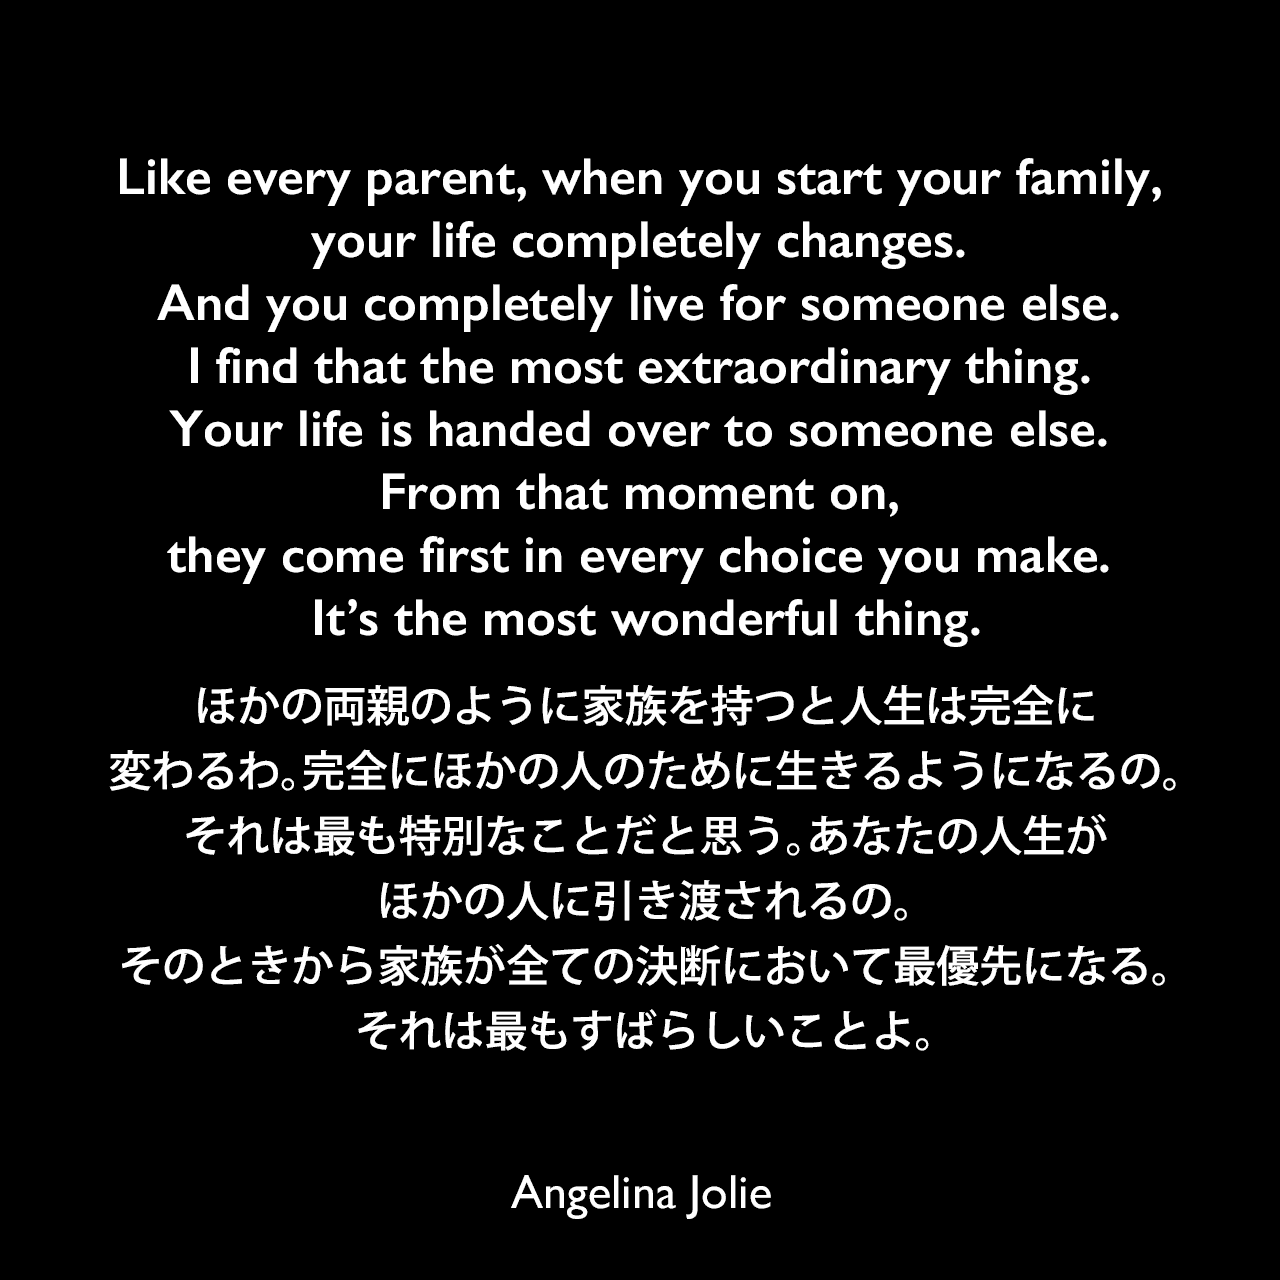 Like every parent, when you start your family, your life completely changes. And you completely live for someone else. I find that the most extraordinary thing. Your life is handed over to someone else. From that moment on, they come first in every choice you make. It’s the most wonderful thing.ほかの両親のように家族を持つと人生は完全に変わるわ。完全にほかの人のために生きるようになるの。それは最も特別なことだと思う。あなたの人生がほかの人に引き渡されるの。そのときから家族が全ての決断において最優先になる。それは最もすばらしいことよ。Angelina Jolie